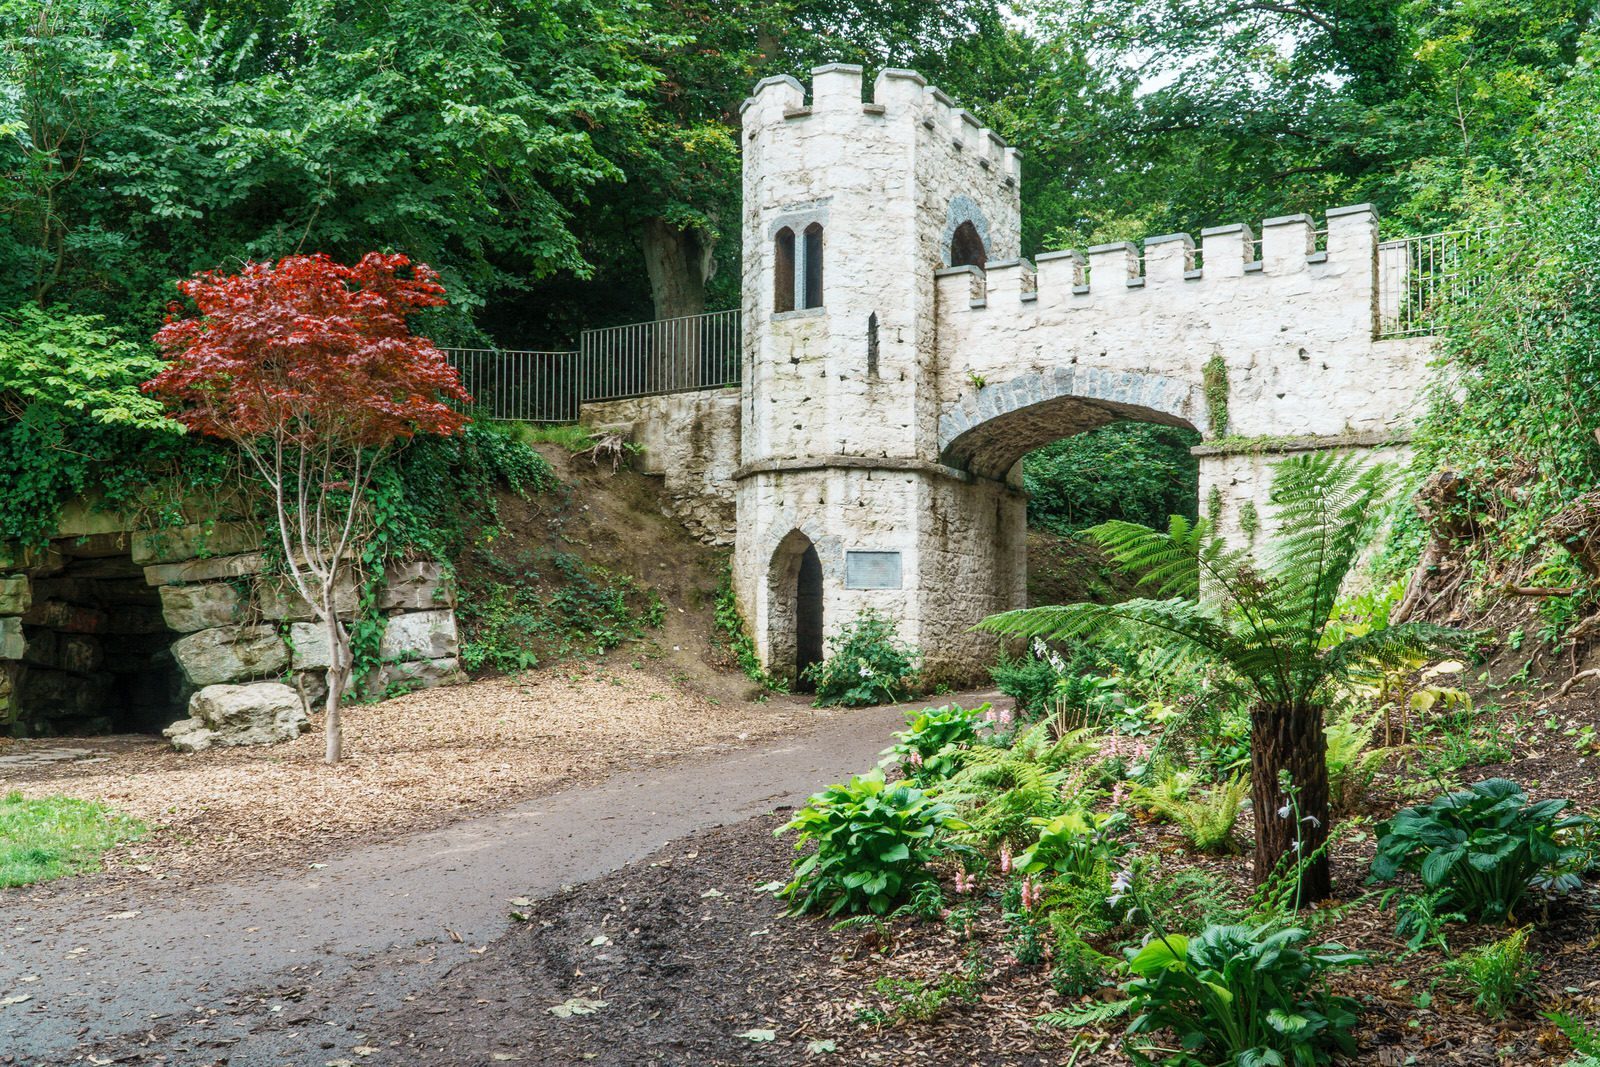 THE ANNIE LEE BRIDGE HAS BEEN RESTORED [THE OLDEST FOLLY IN ST ANNE'S PARK] 005